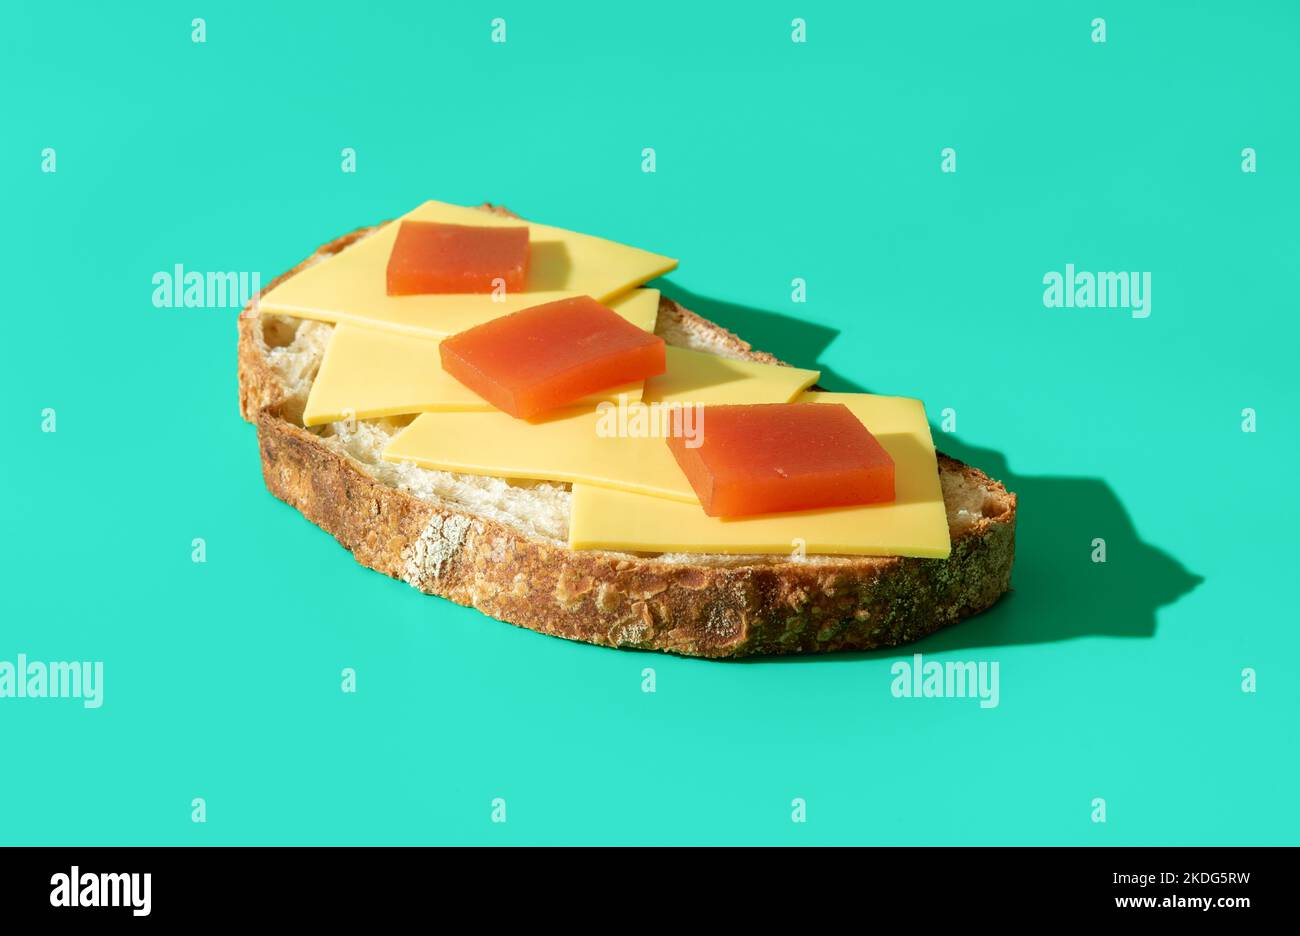 Close-up with a single slice of homemade bread with cheese and quince marmalade on top of it. Cheese and quince jelly on a slice of bread, minimalist Stock Photo